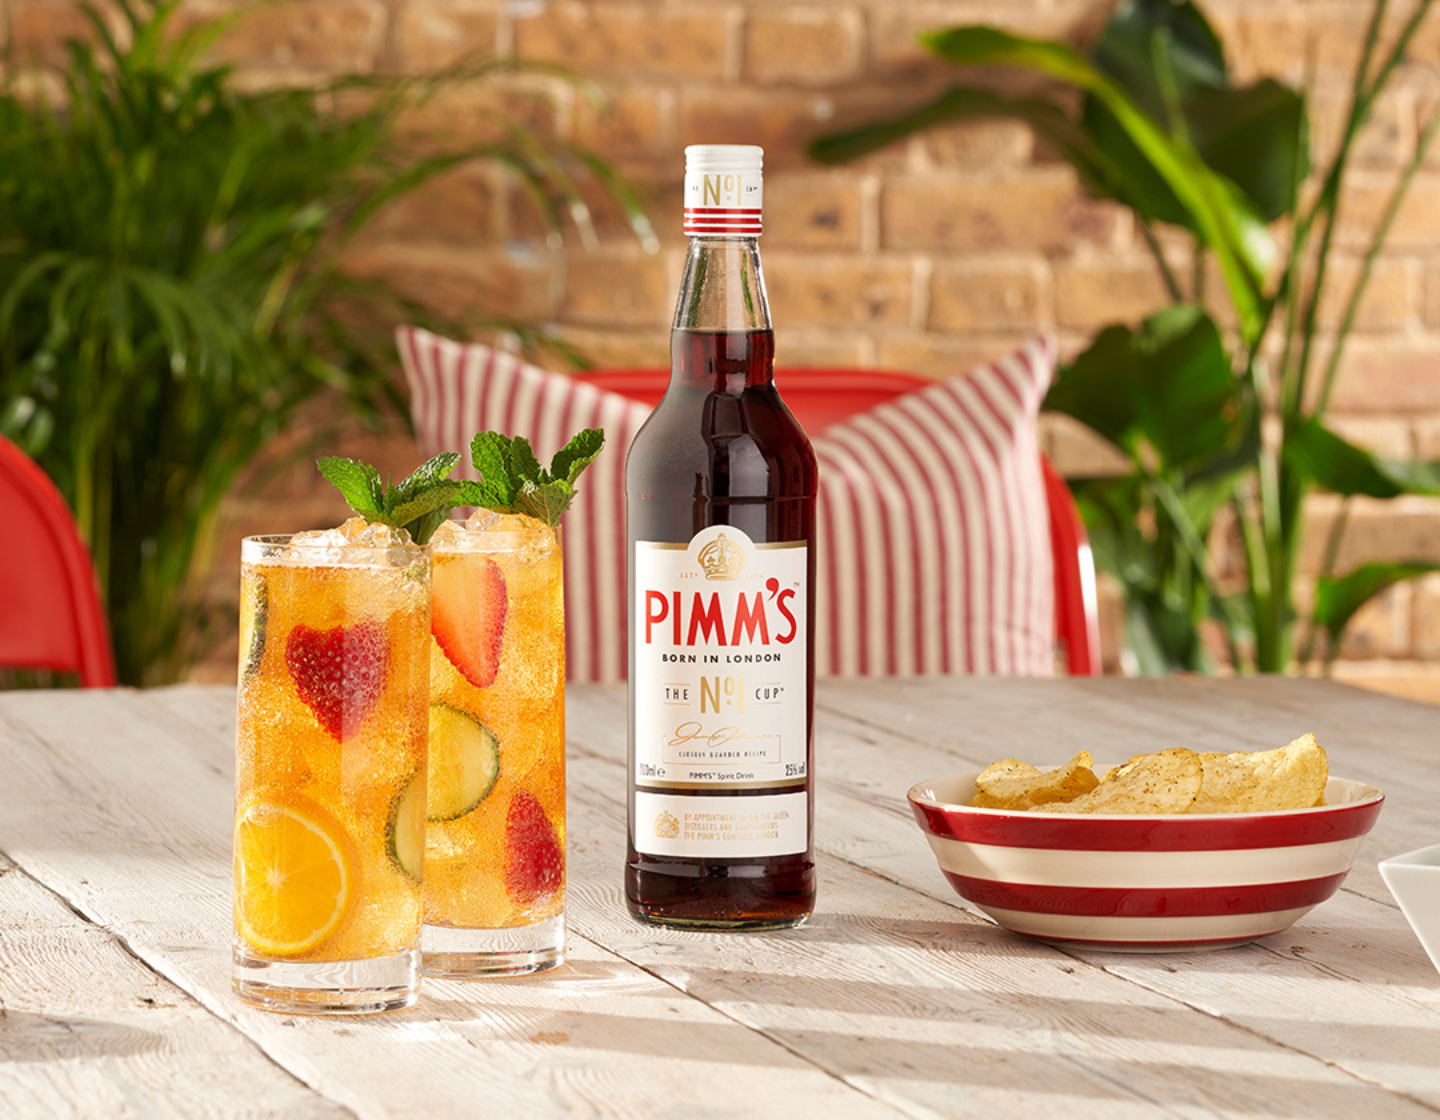 Bottle of Pimm’s on table beside two glasses filled with cocktails and a plate of crisps 